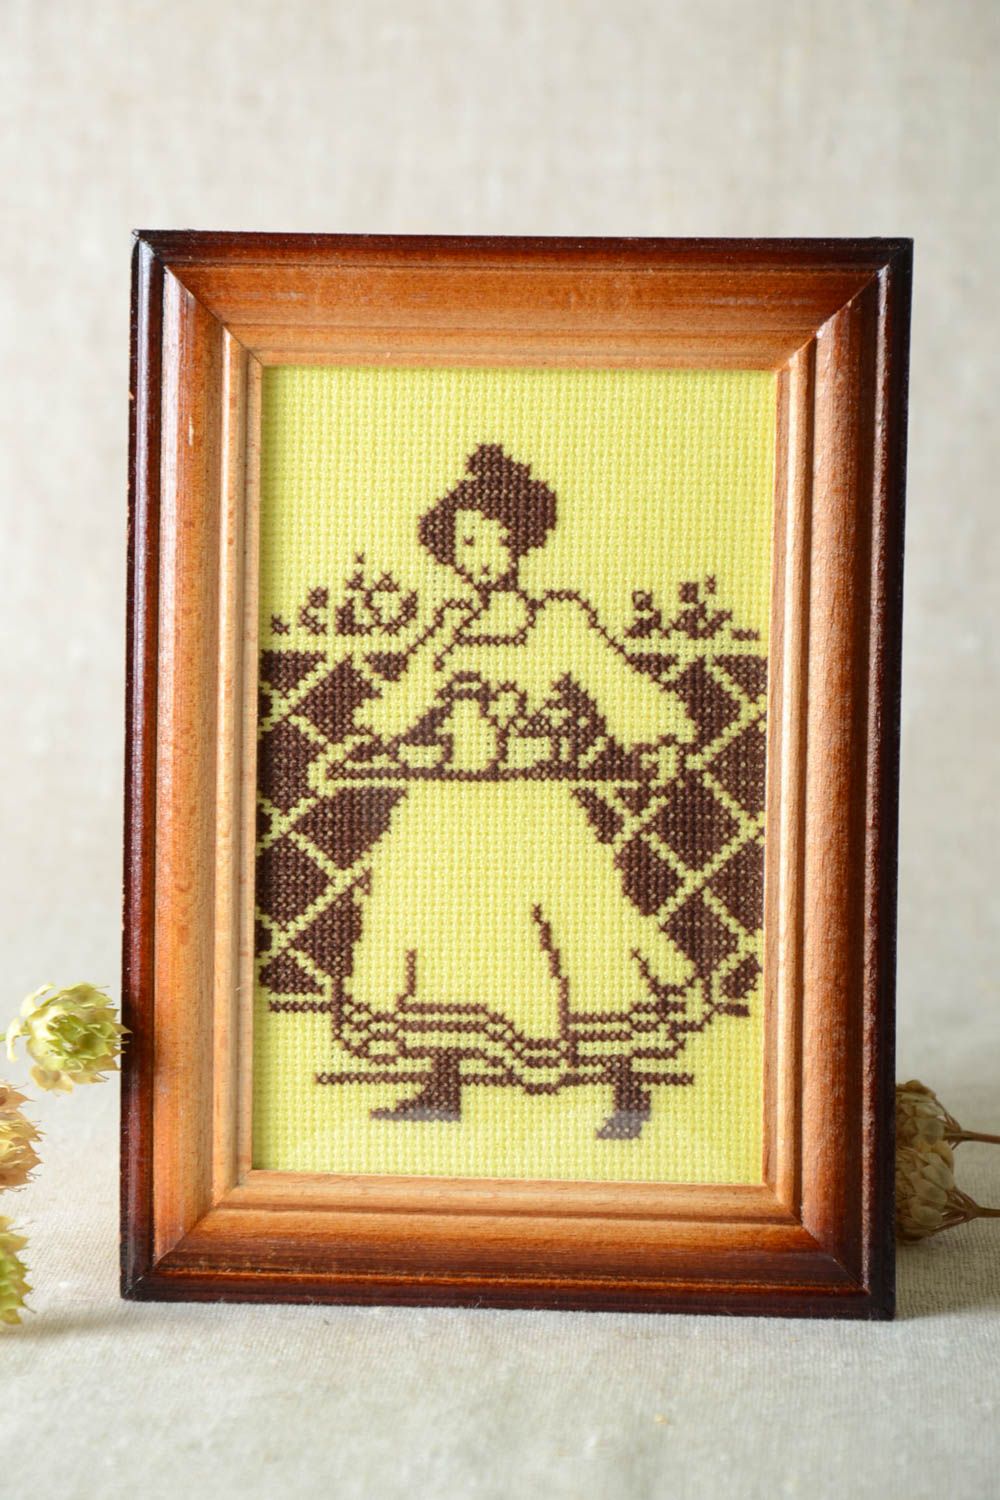 Handmade cross-stitch embroidery decorative picture with embroidery home decor photo 1